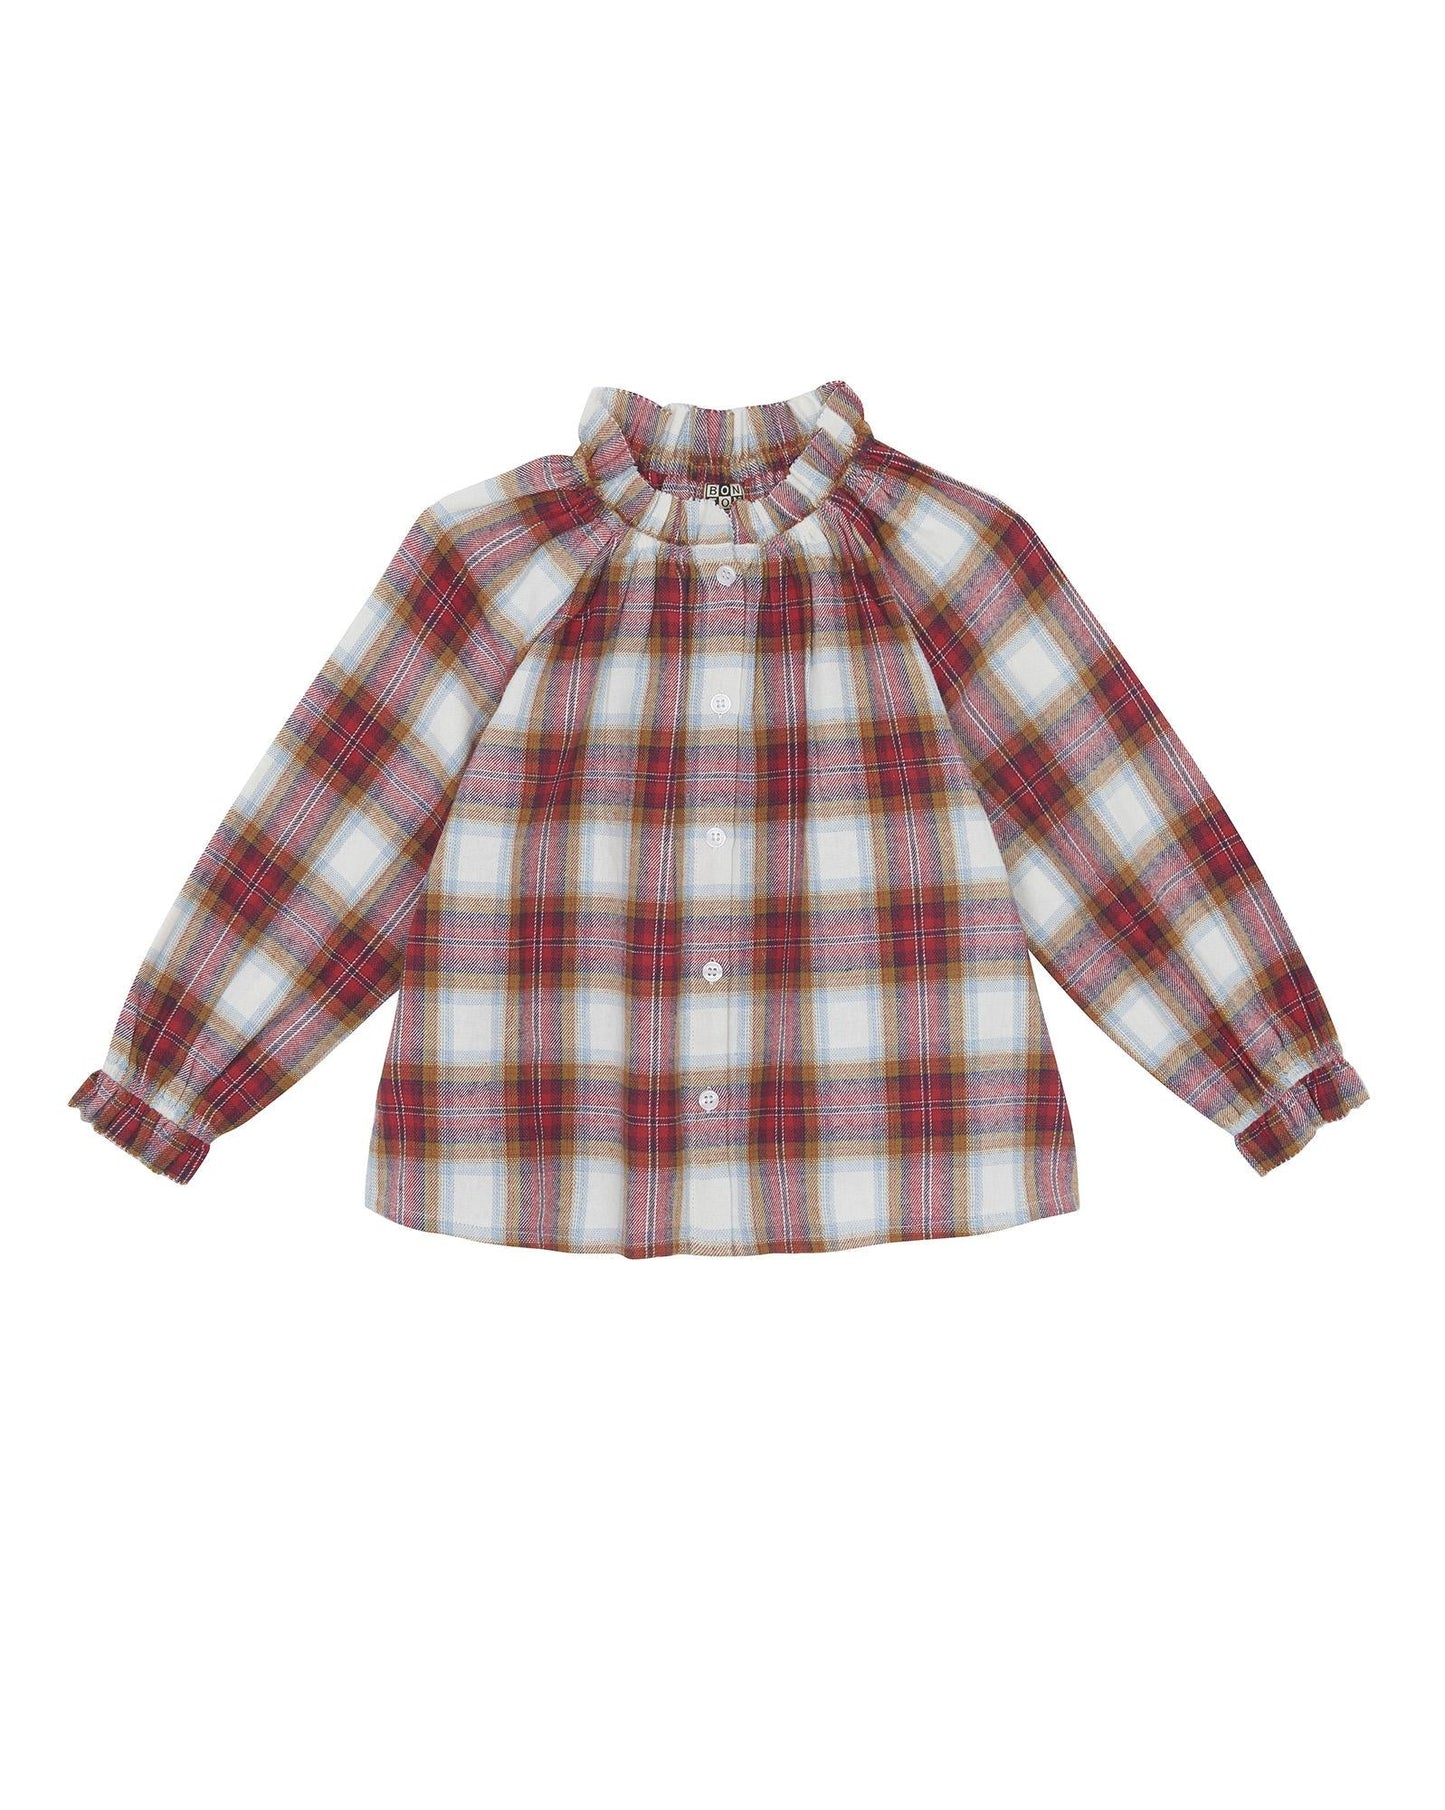 Blouse Ermine Red has Check scraped twill